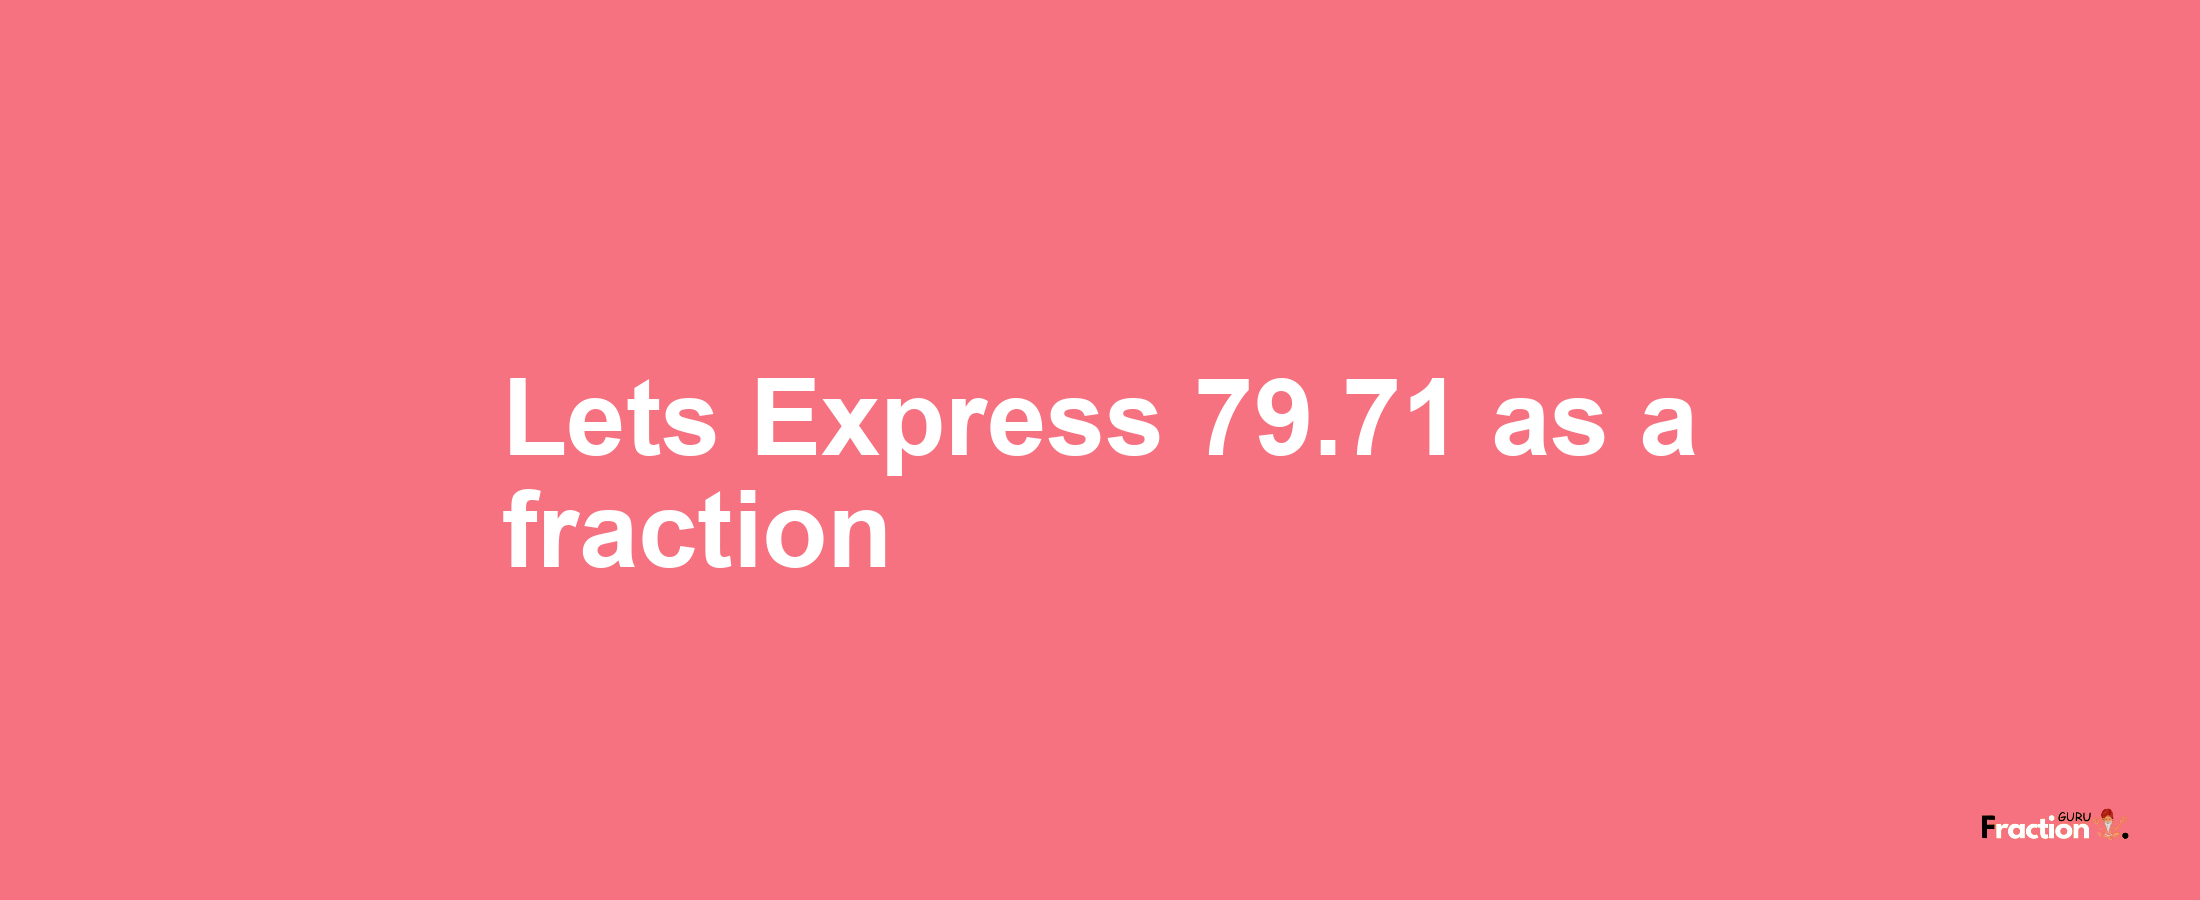 Lets Express 79.71 as afraction